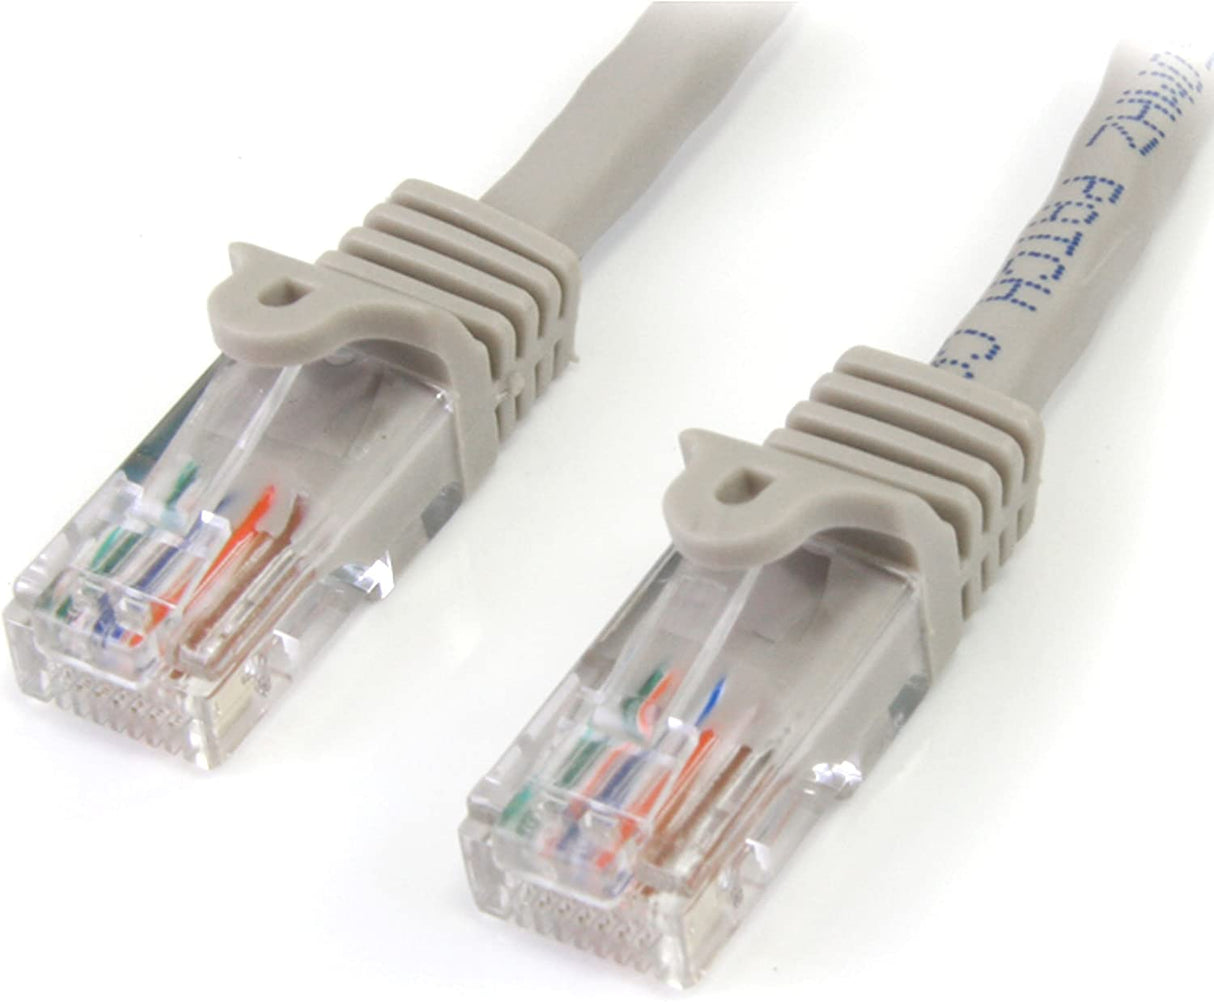 StarTech.com Cat5e Ethernet Cable - 100 ft - Gray- Patch Cable - Snagless Cat5e Cable - Long Network Cable - Ethernet Cord - Cat 5e Cable - 100ft (45PATCH100GR), Grey, 100 ft / 30.5m 100 ft / 30.5m Grey